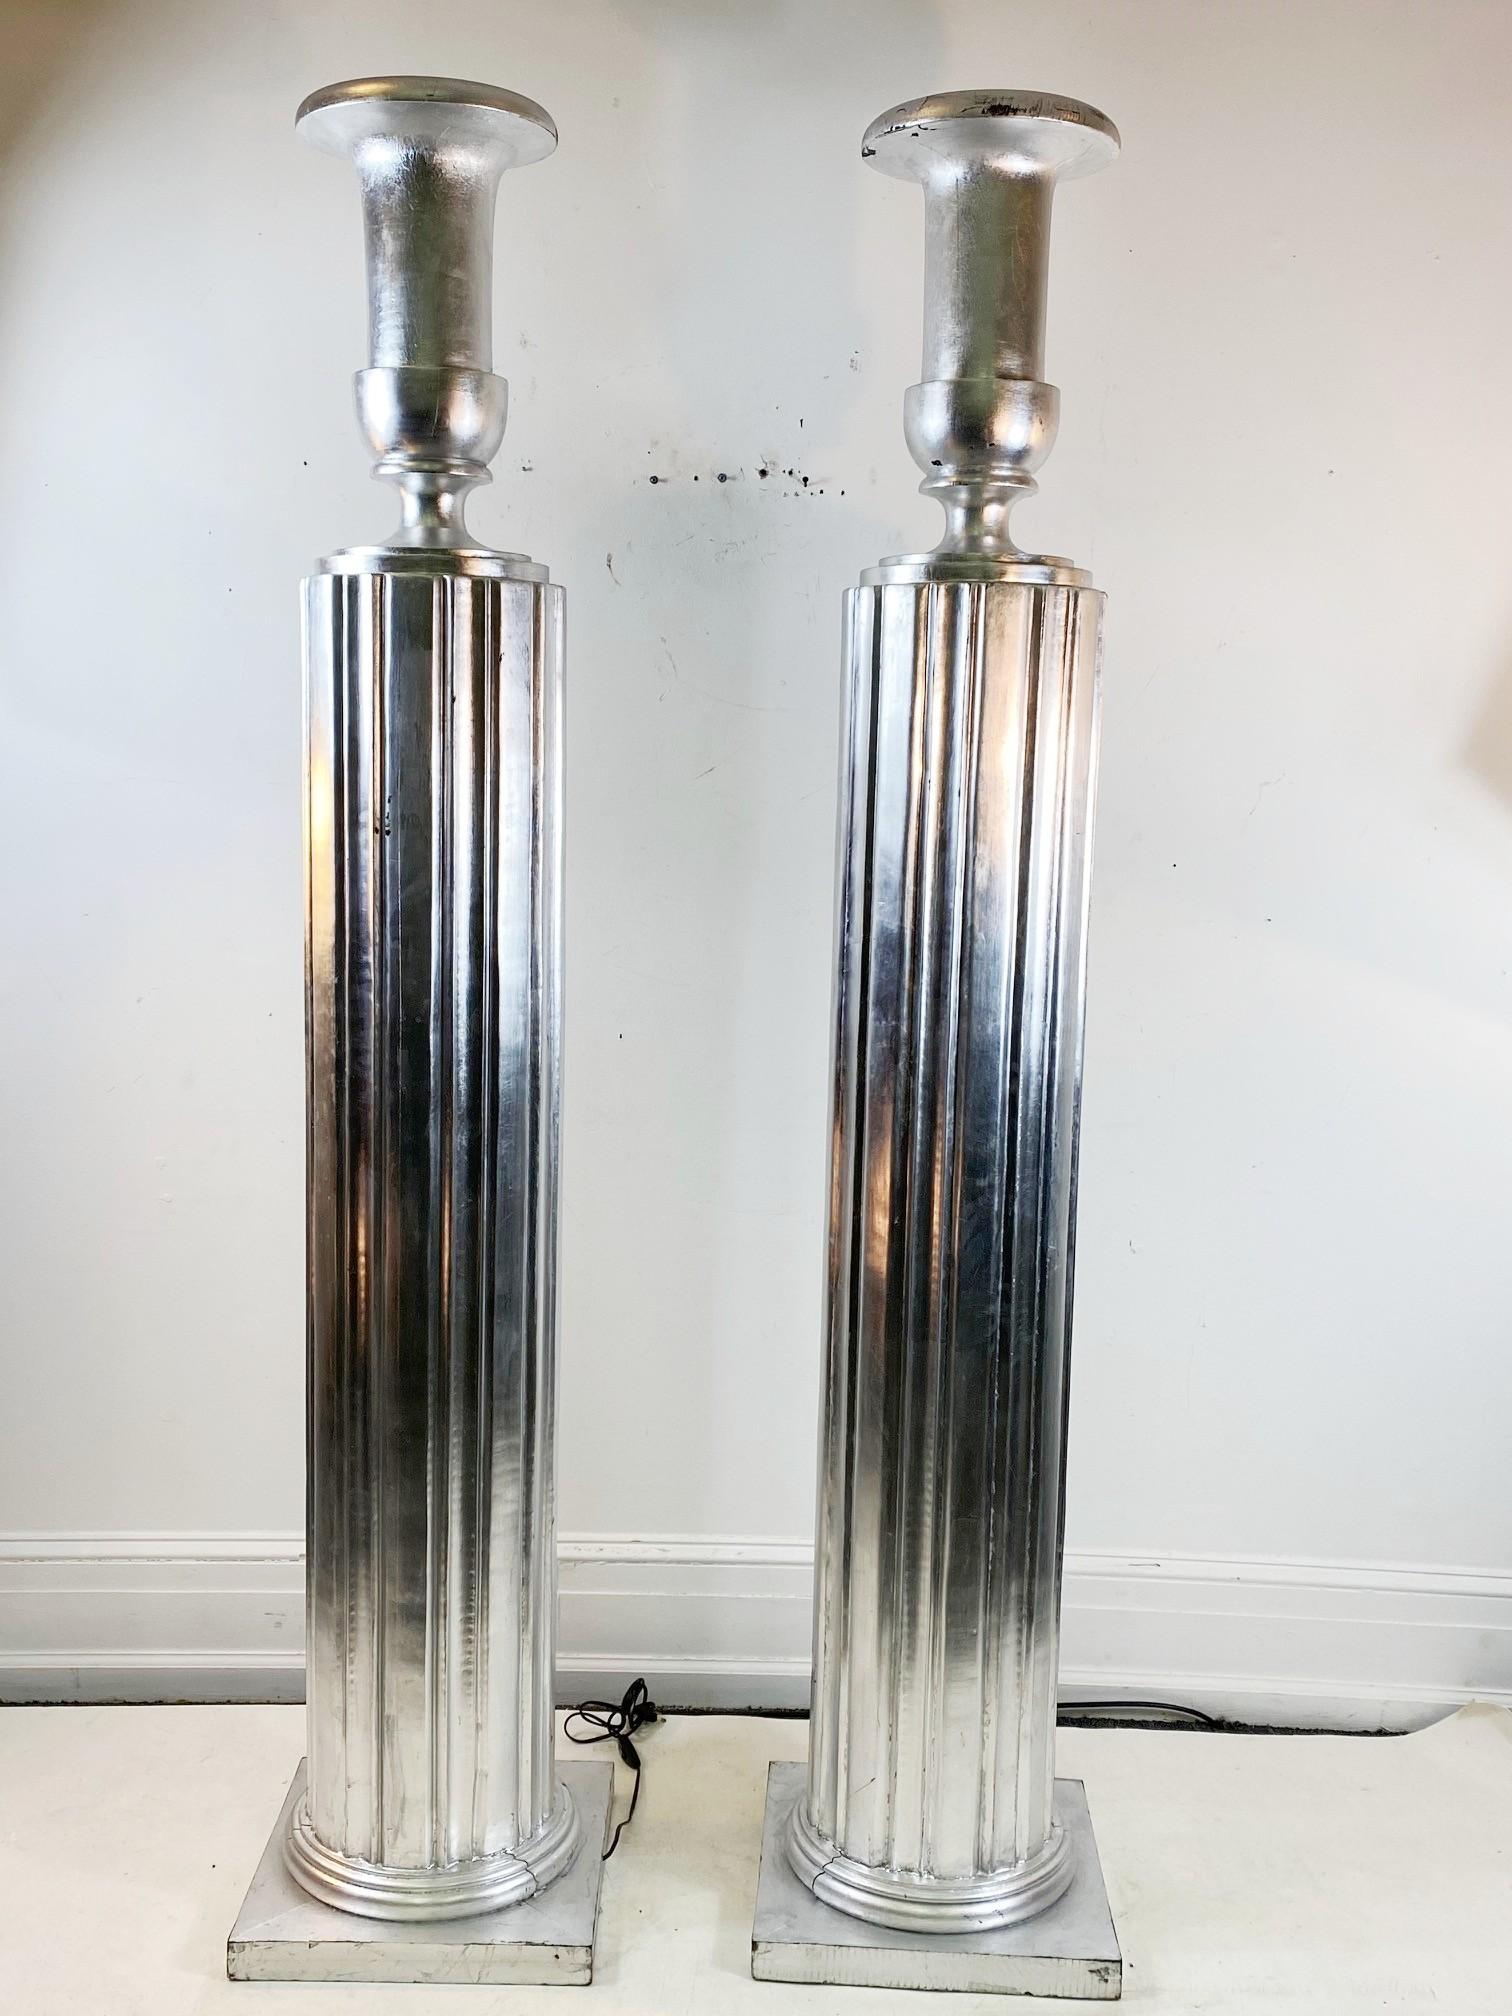 Art Deco Style pair of monumental torchère floor lamps consisting of fluted column bases with a large urn mounted on top. The pair is made of carved and silvered wood. In great vintage condition with age-appropriate wear and use.